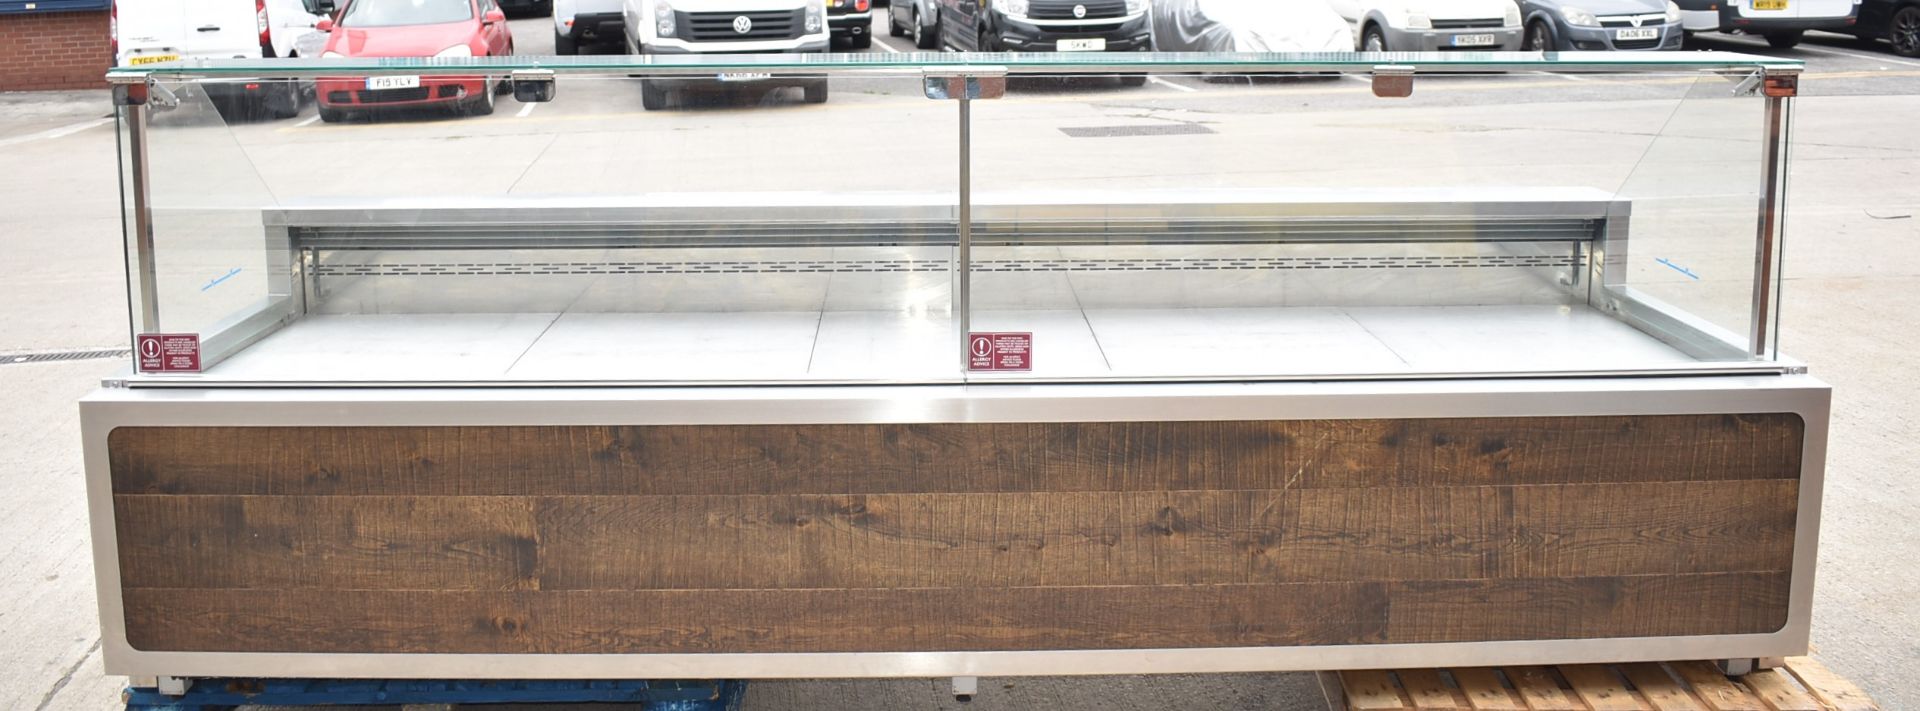 1 x Eurocryor Bistro Refrigerated Retail Counter - Suitable For Takeaways, Butchers, Deli, Cake - Image 23 of 28